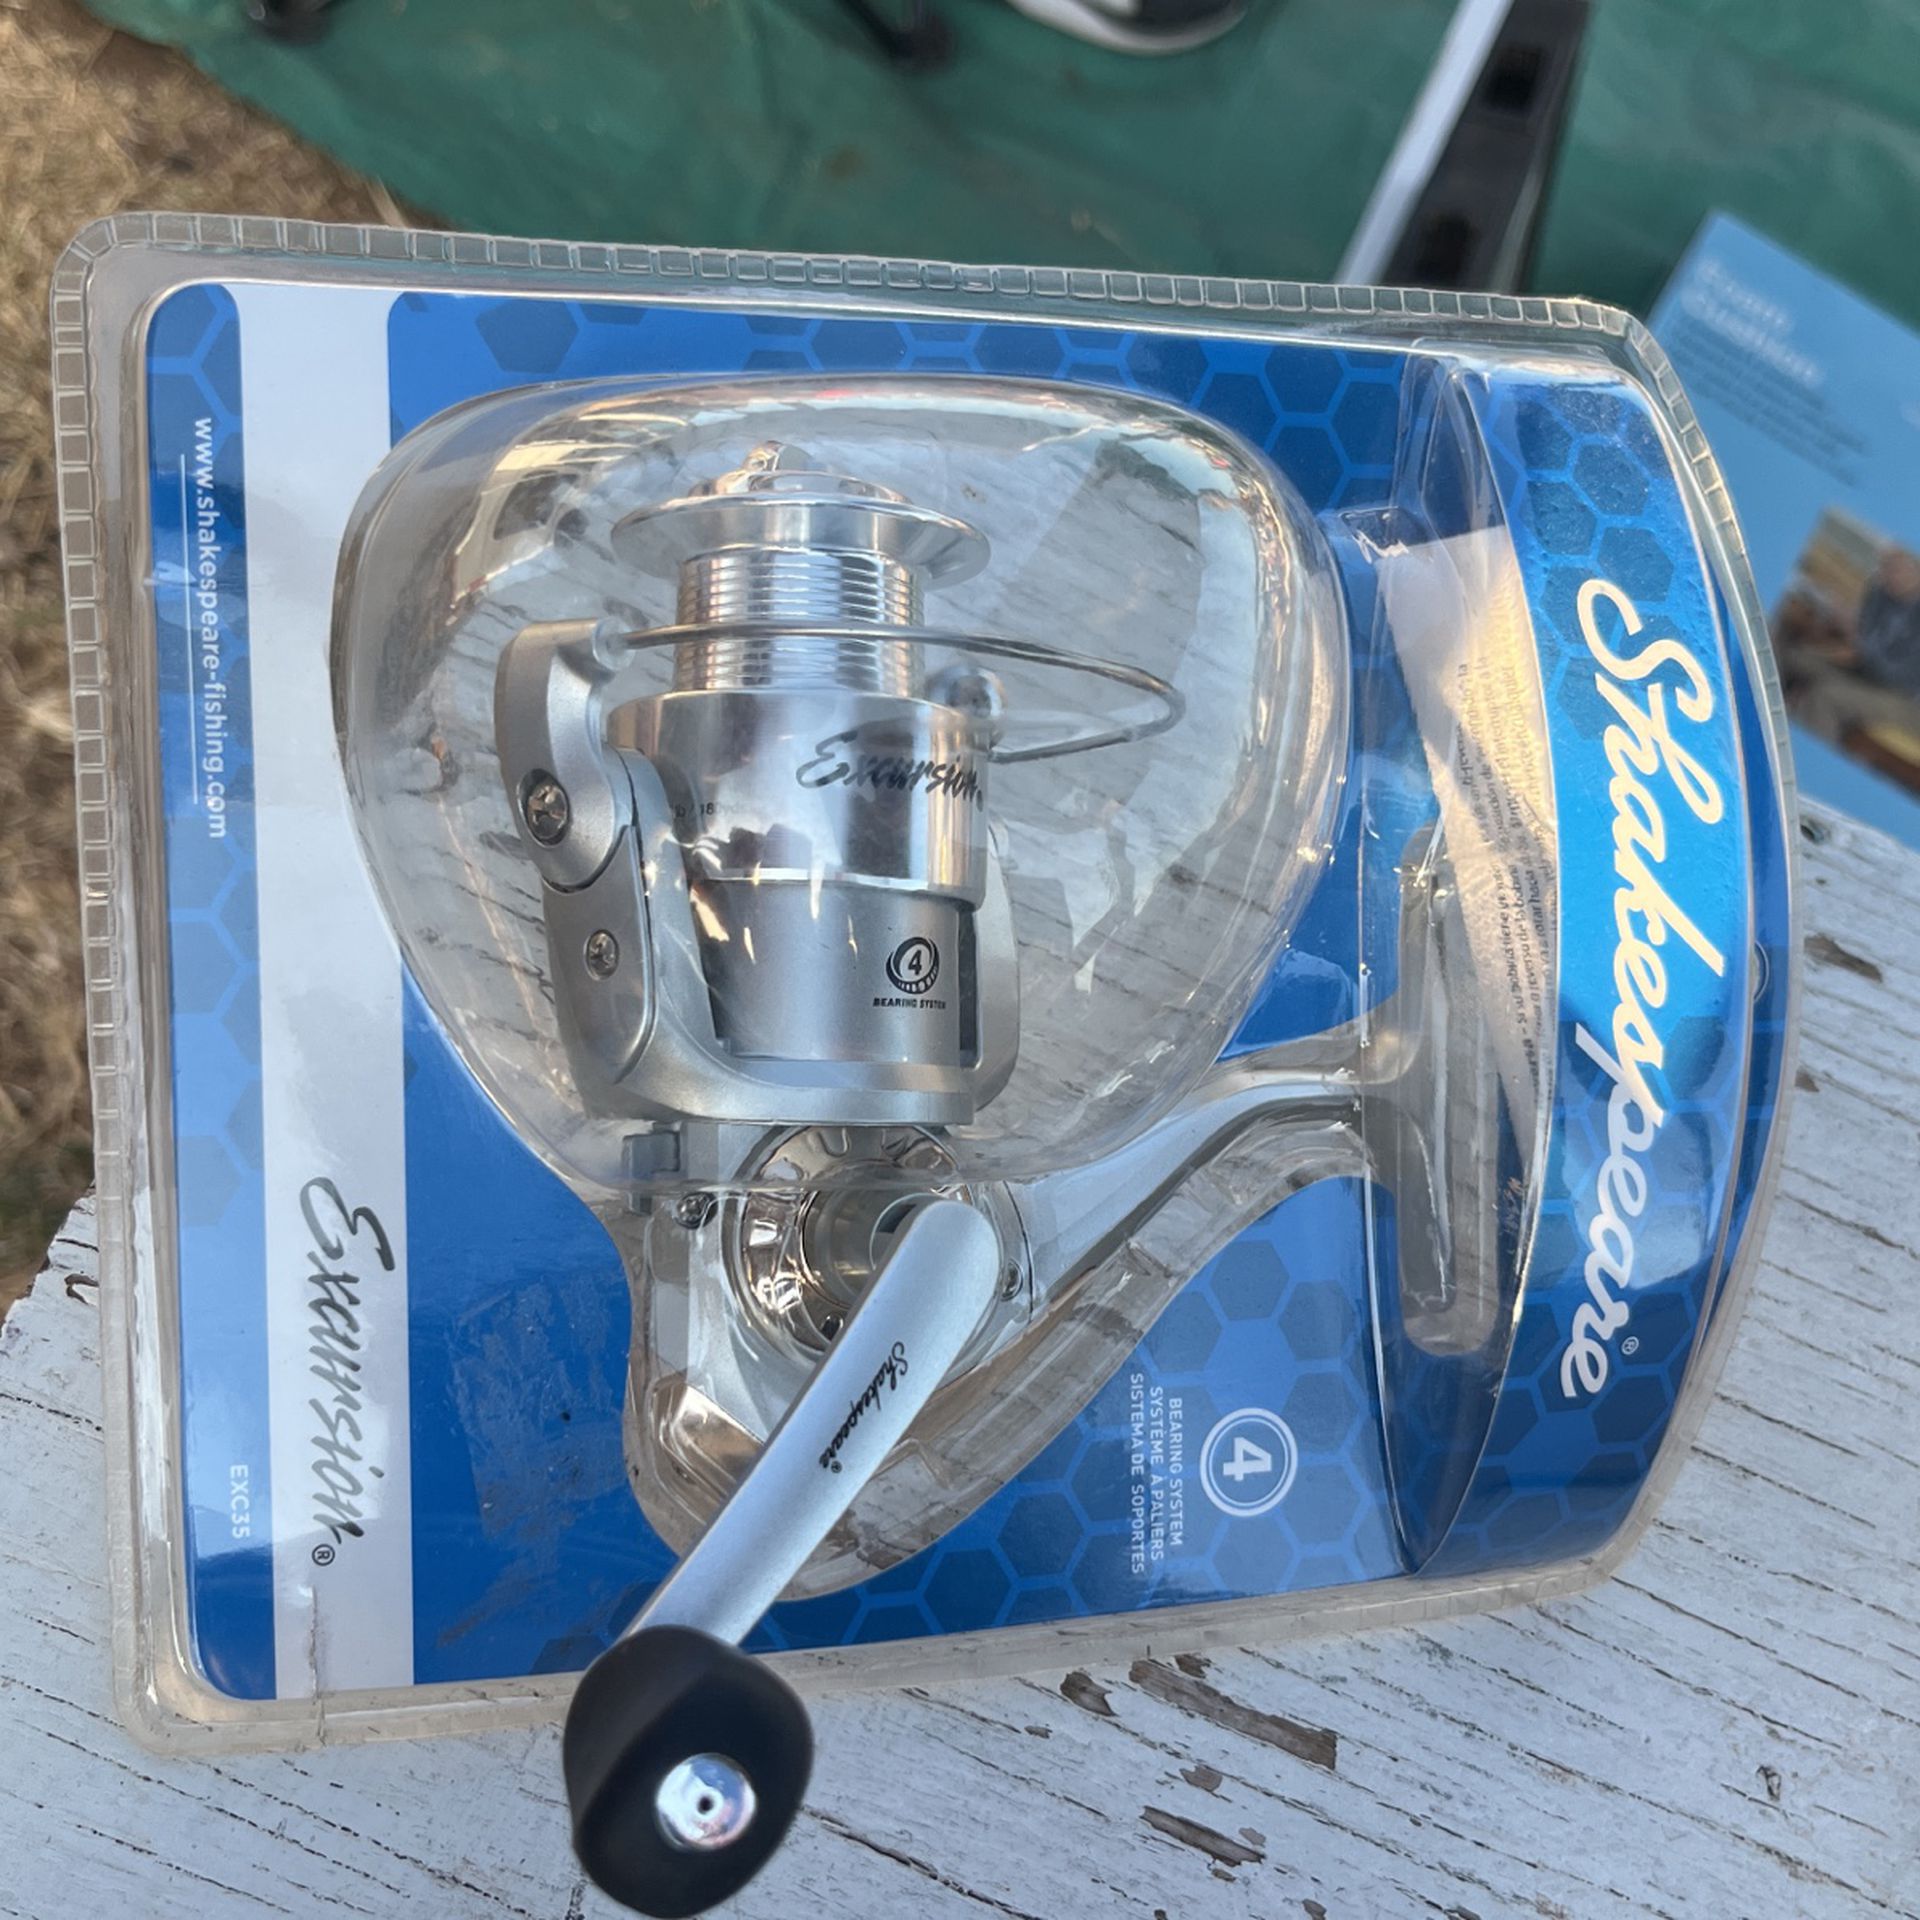 Shakespeare Excursion Fishing Spinning Reel for Sale in San